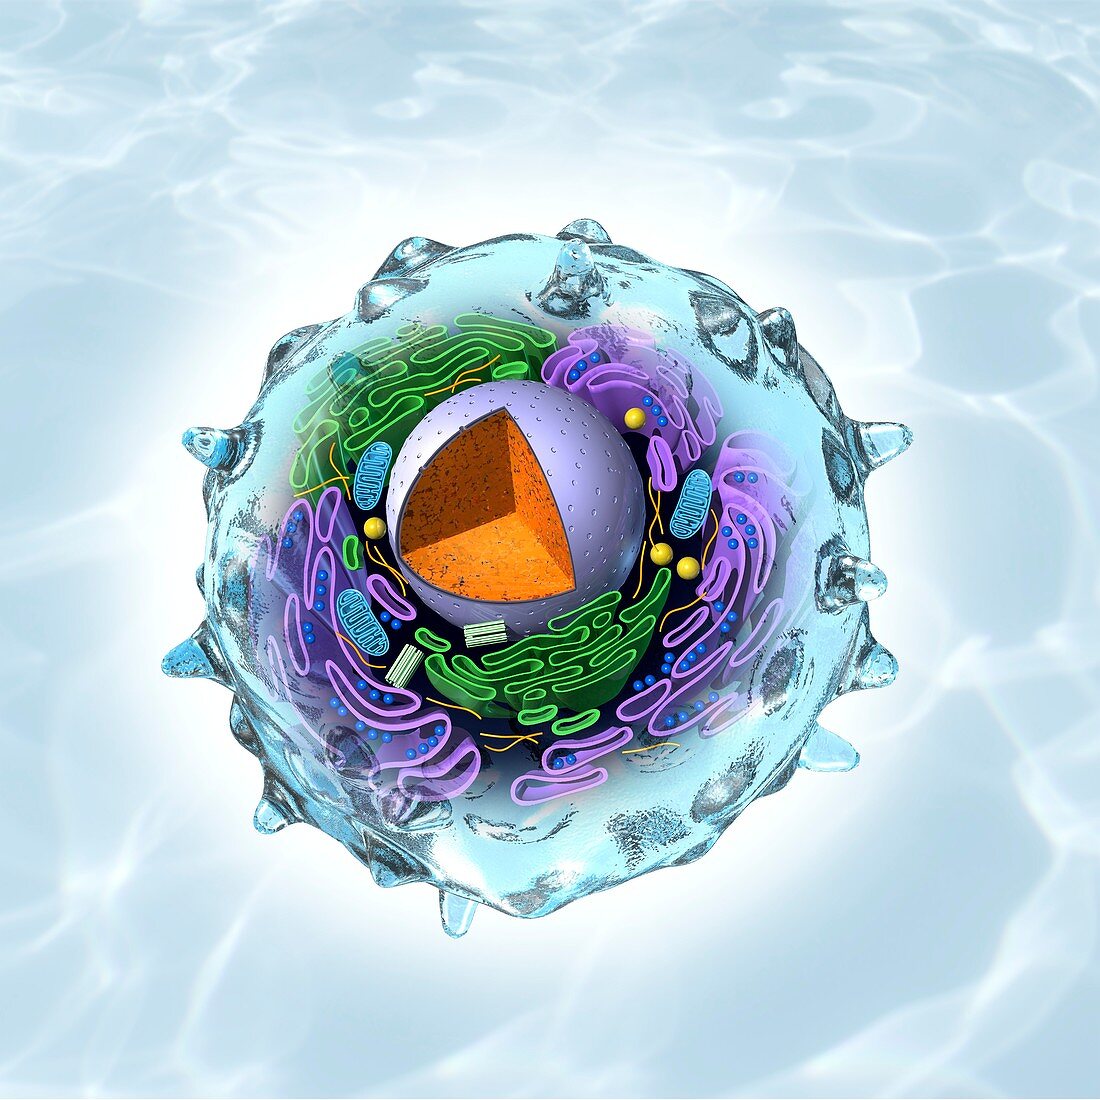 Animal cell structure,artwork